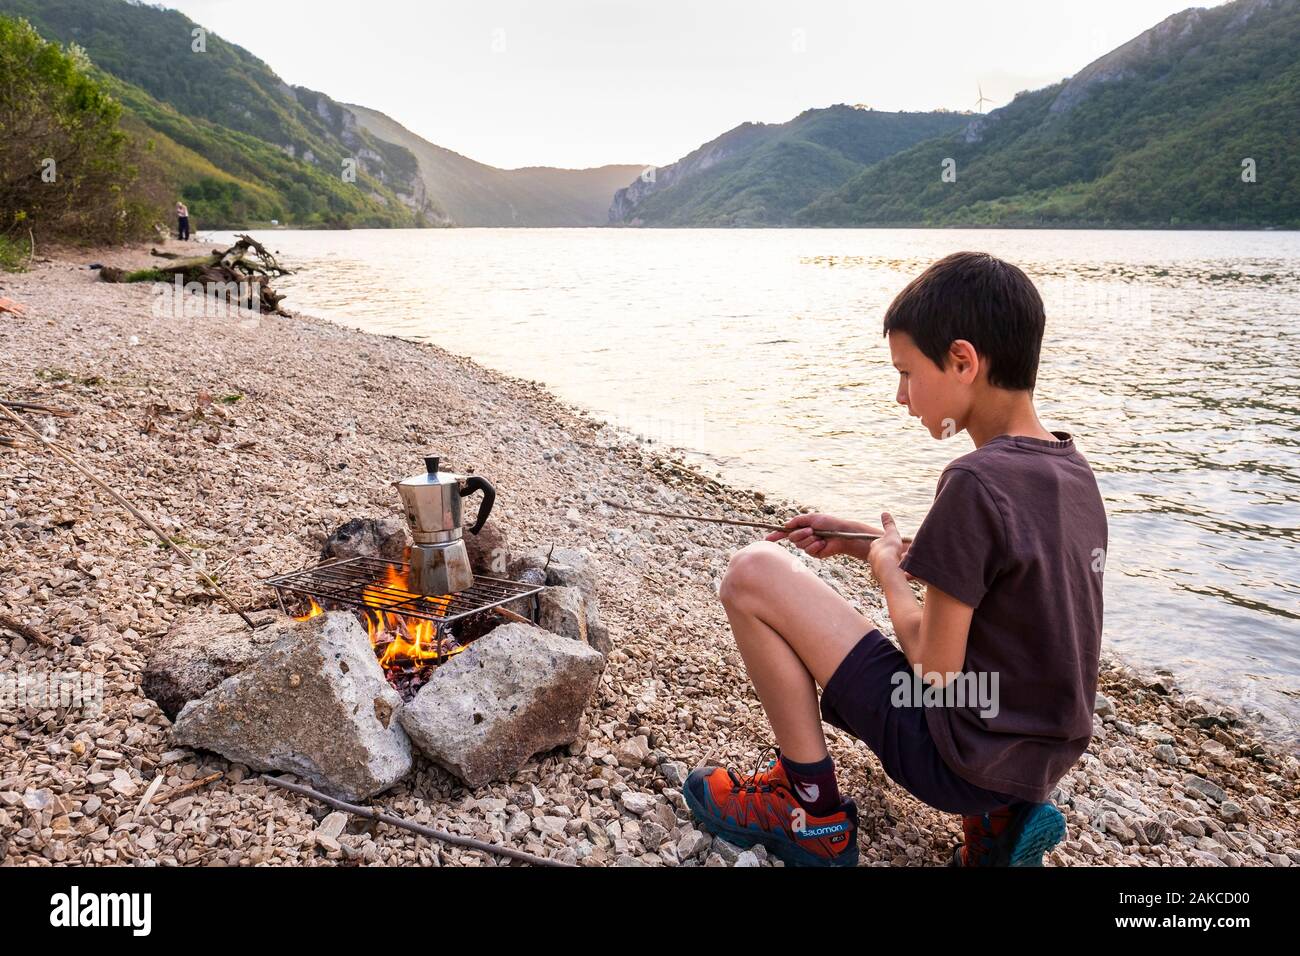 Serbia, Golubac, Clement takes care of the fire for the evening meal on the banks of the Danube Stock Photo